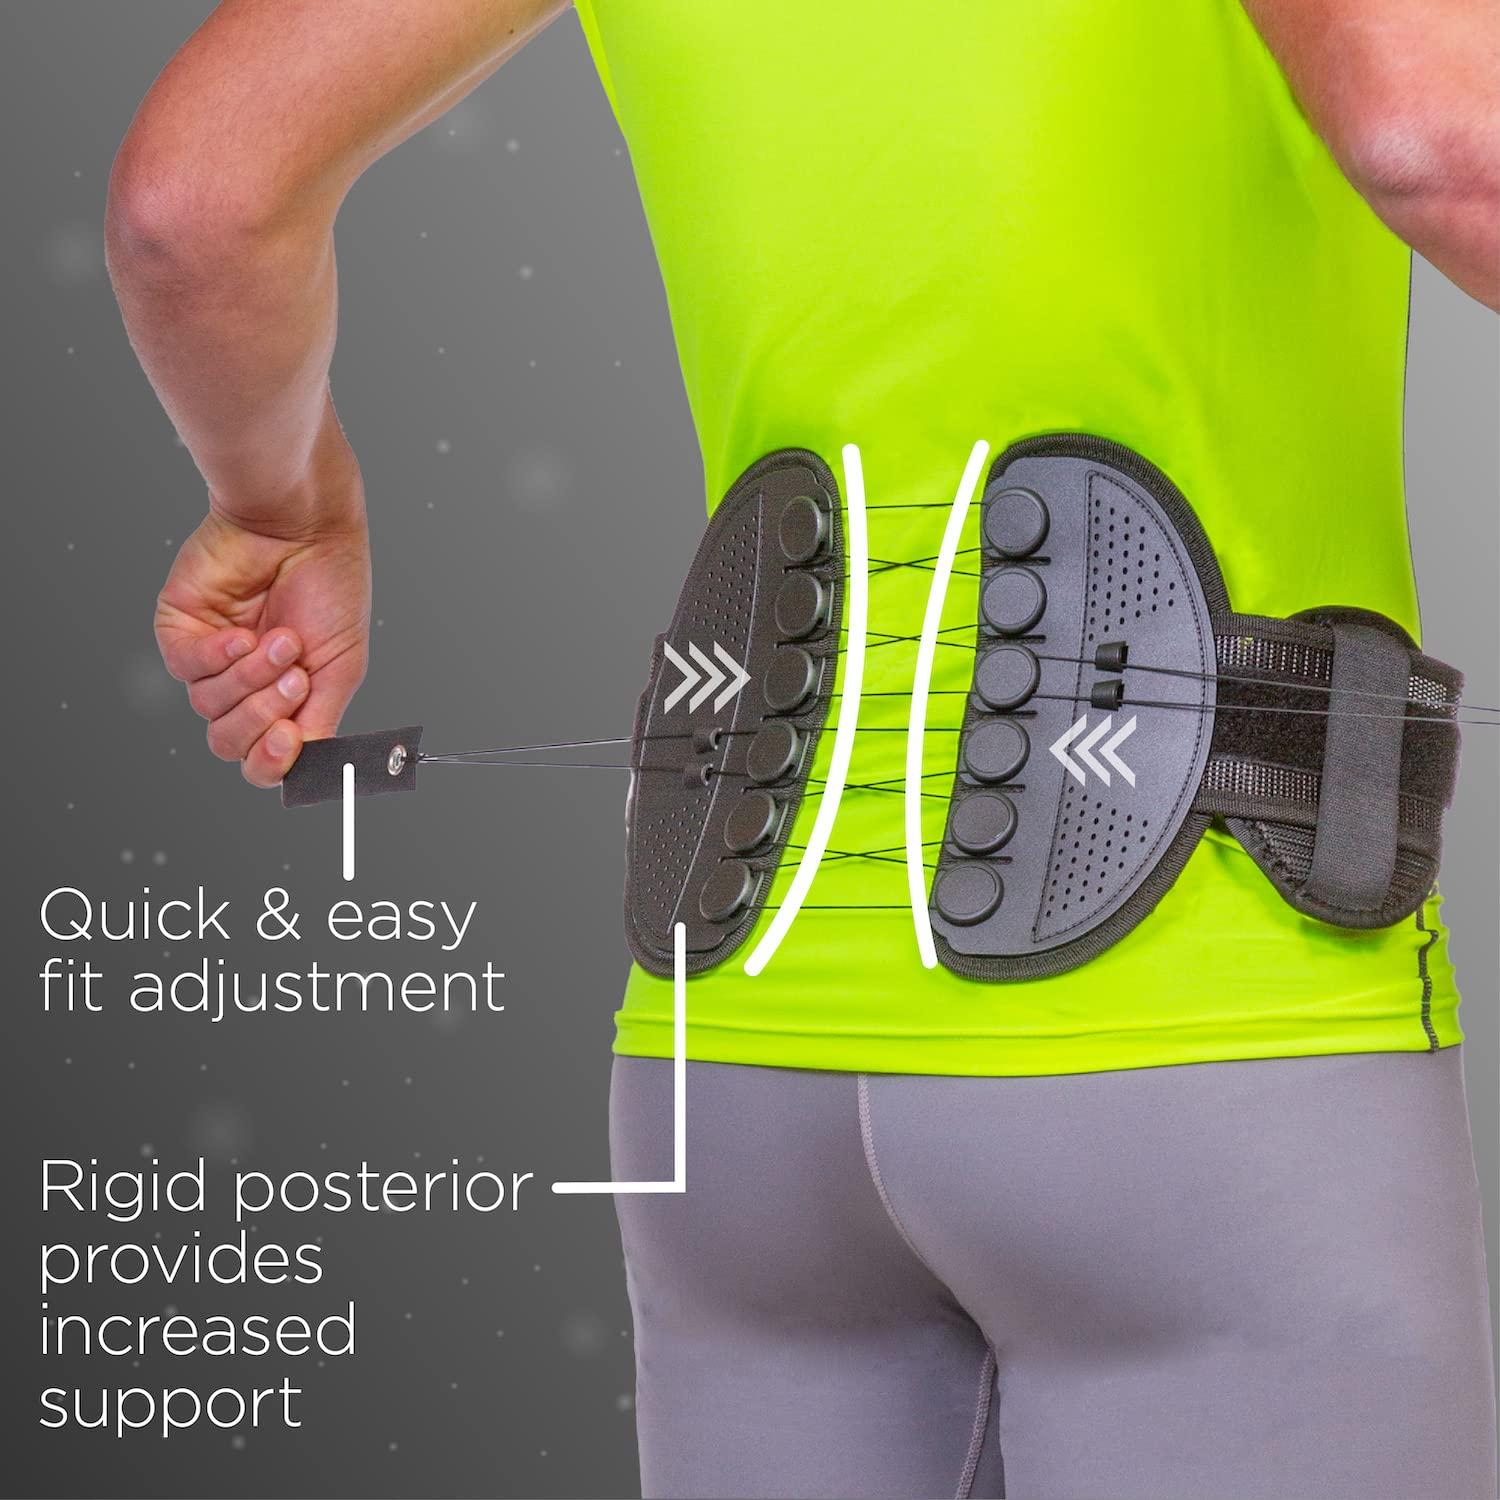 Sacroiliac Compression Brace | Si Joint Pain Relief Belt with Hip Support Pads